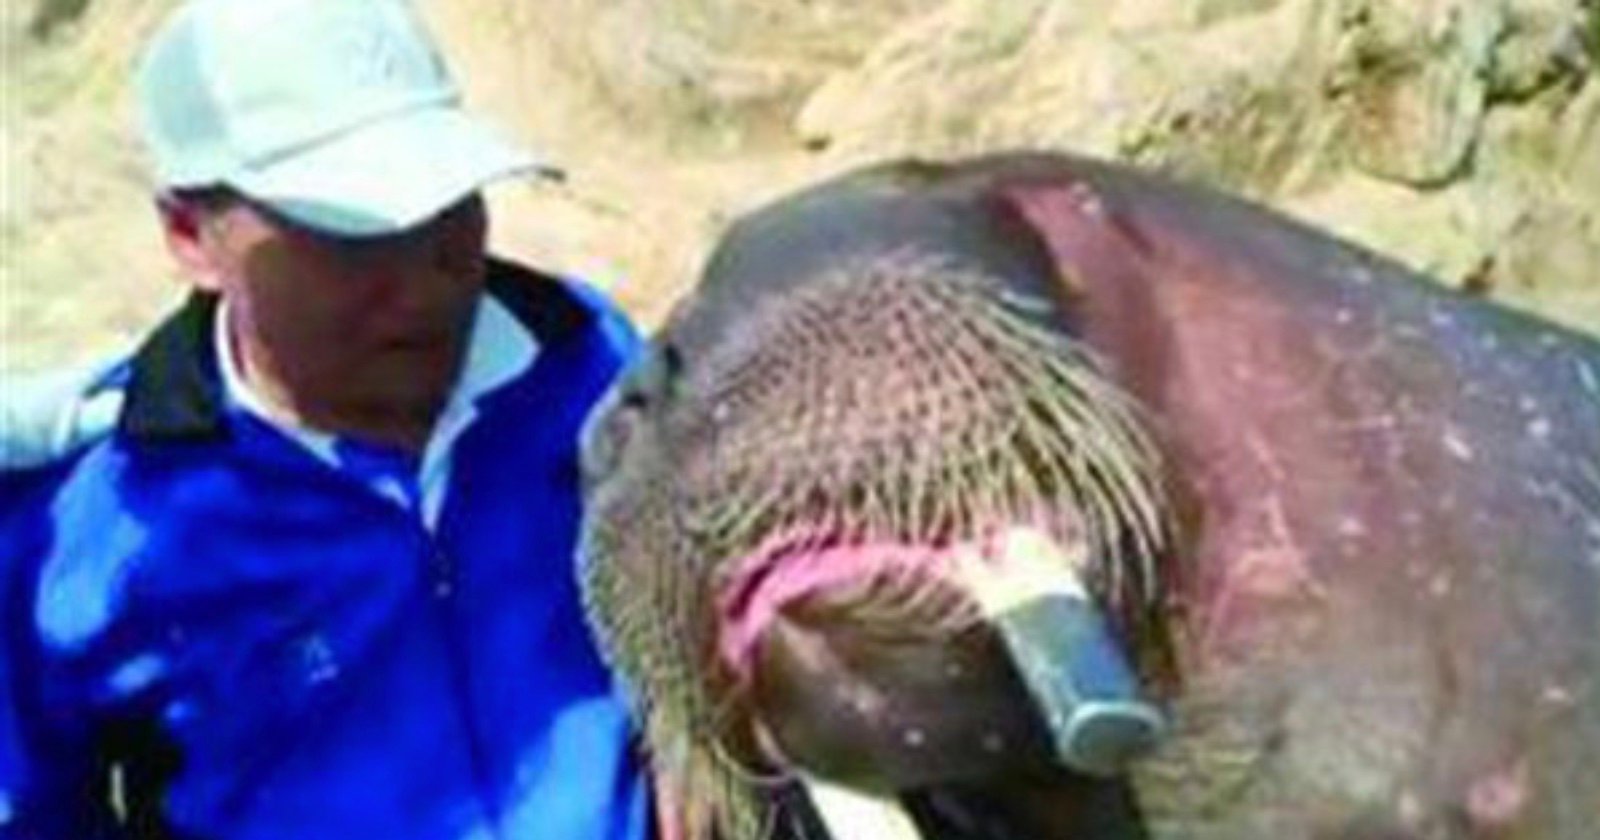  story man who was killed walrus taking 